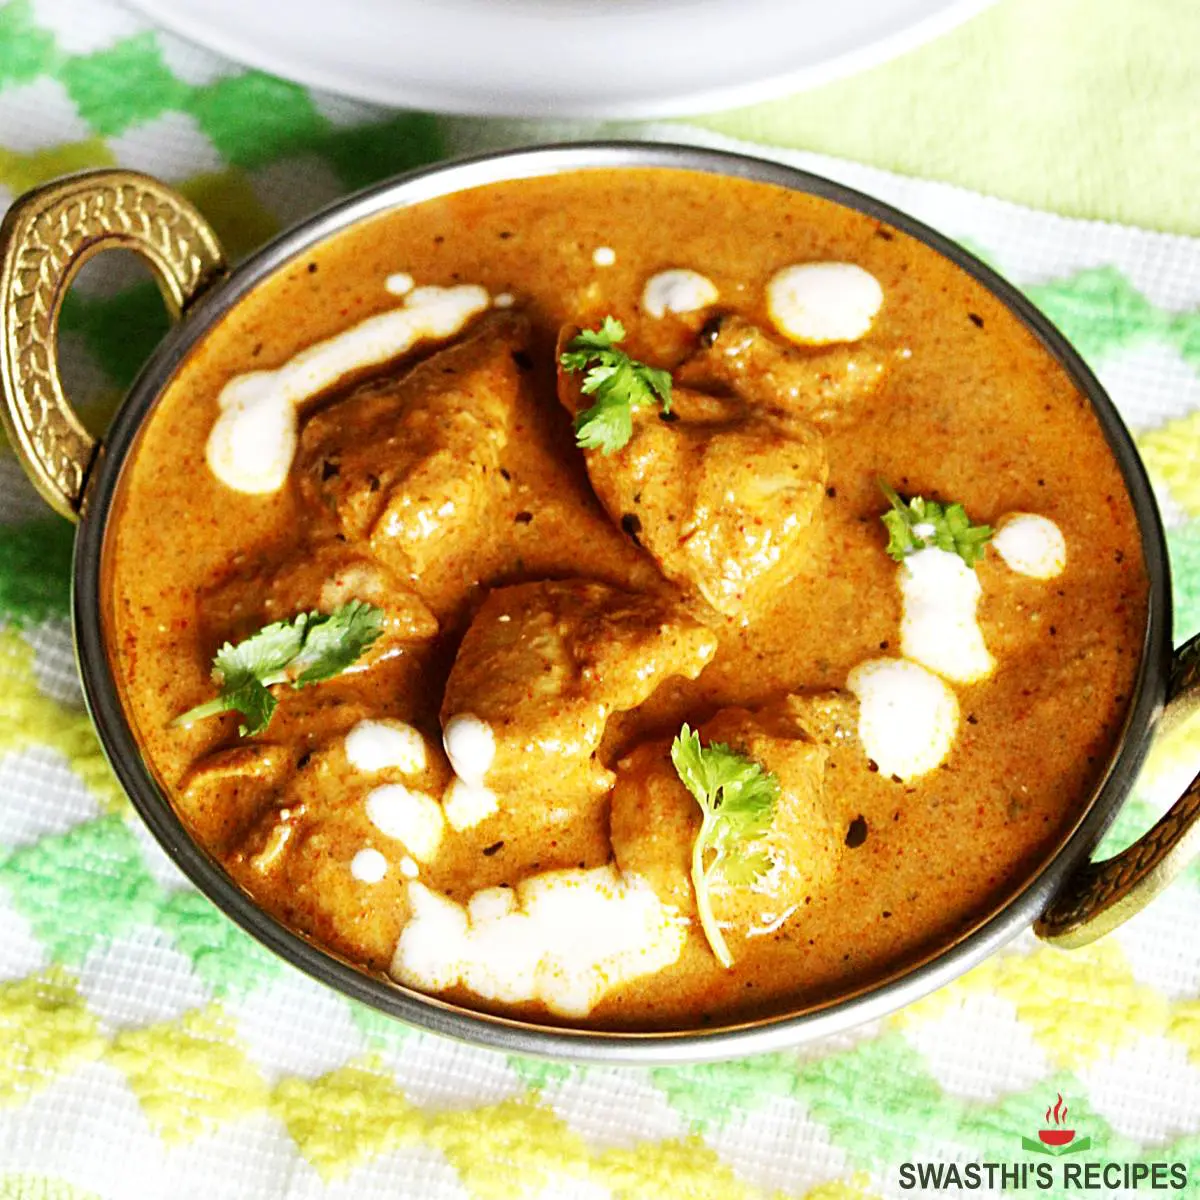 Butter Chicken also known as Murgh Makhani or chicken makhani is a popular Indian dish